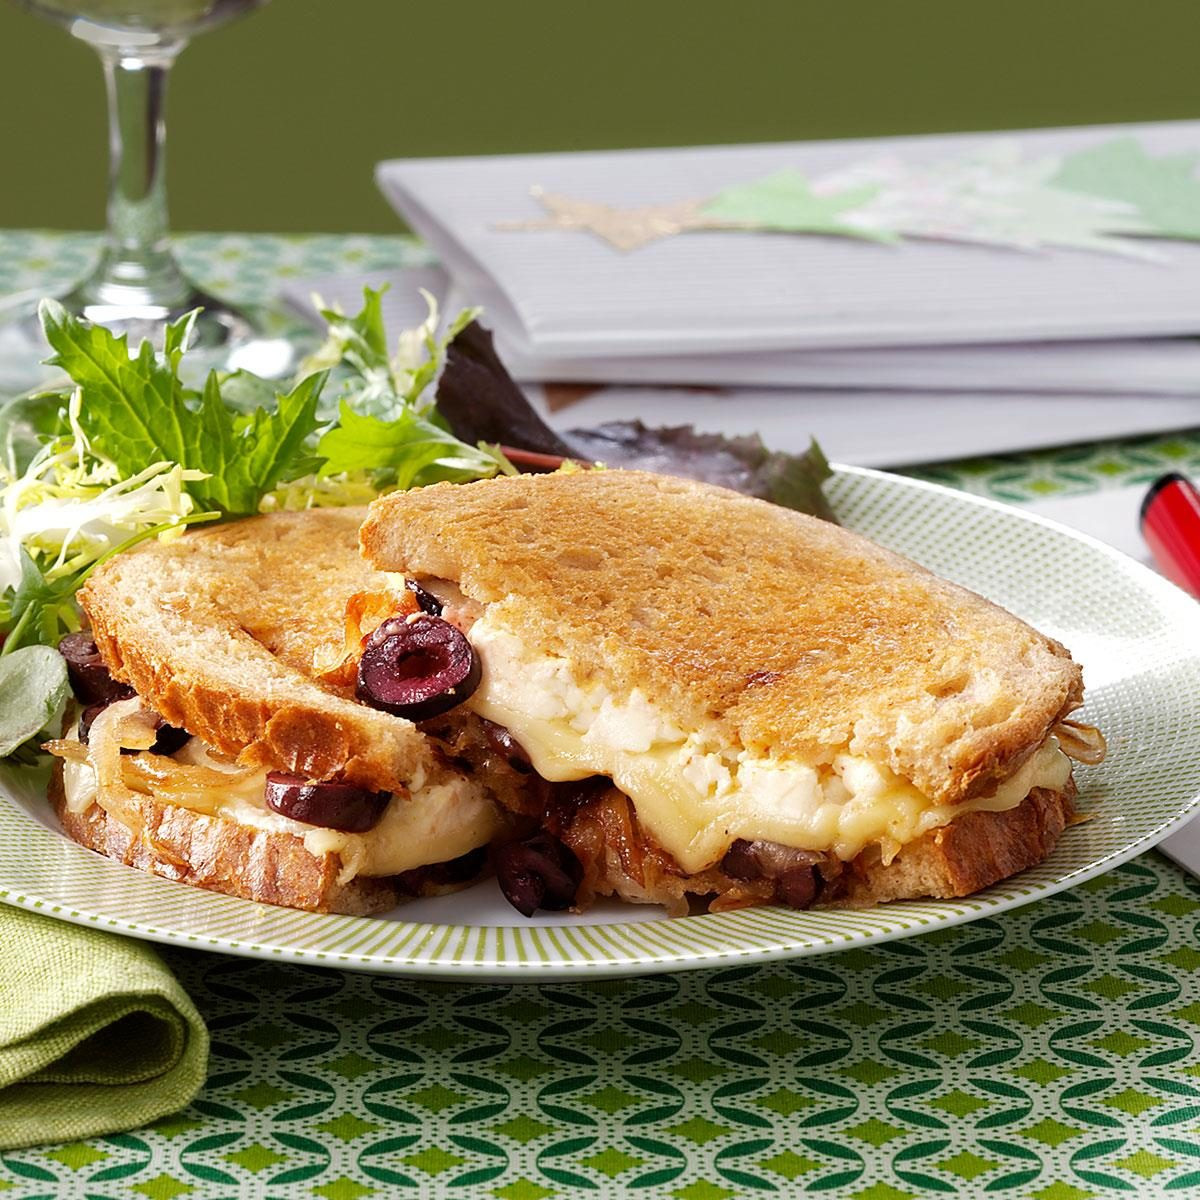 Gourmet Grilled Cheese Sandwiches
 Gourmet Grilled Cheese Sandwich Recipe